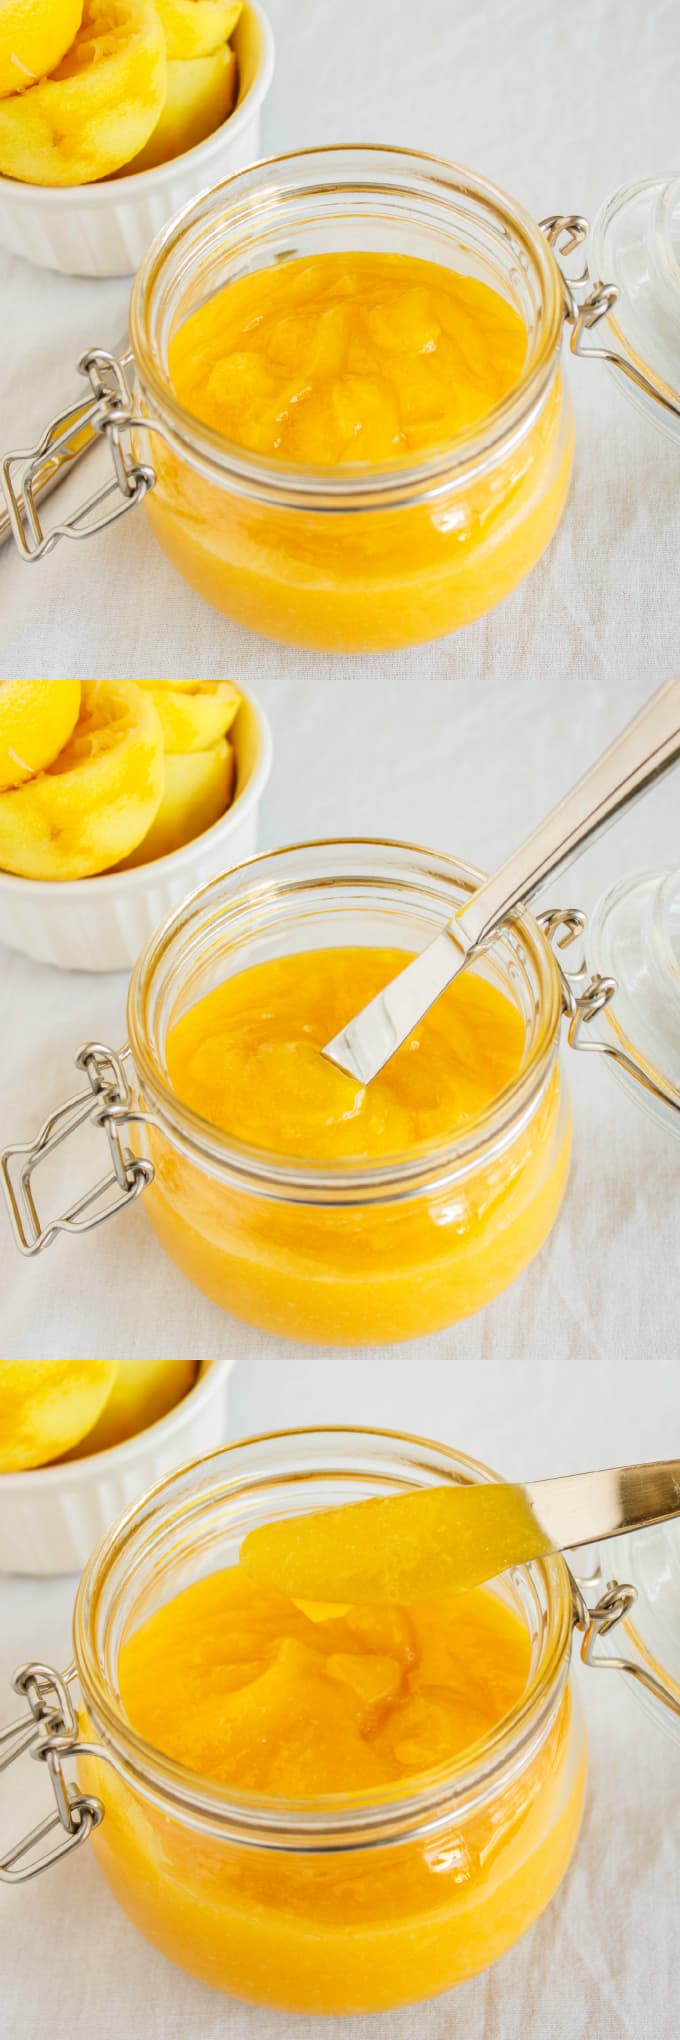 Brown Butter Lemon Curd in glass jars with knives with bowls of lemons